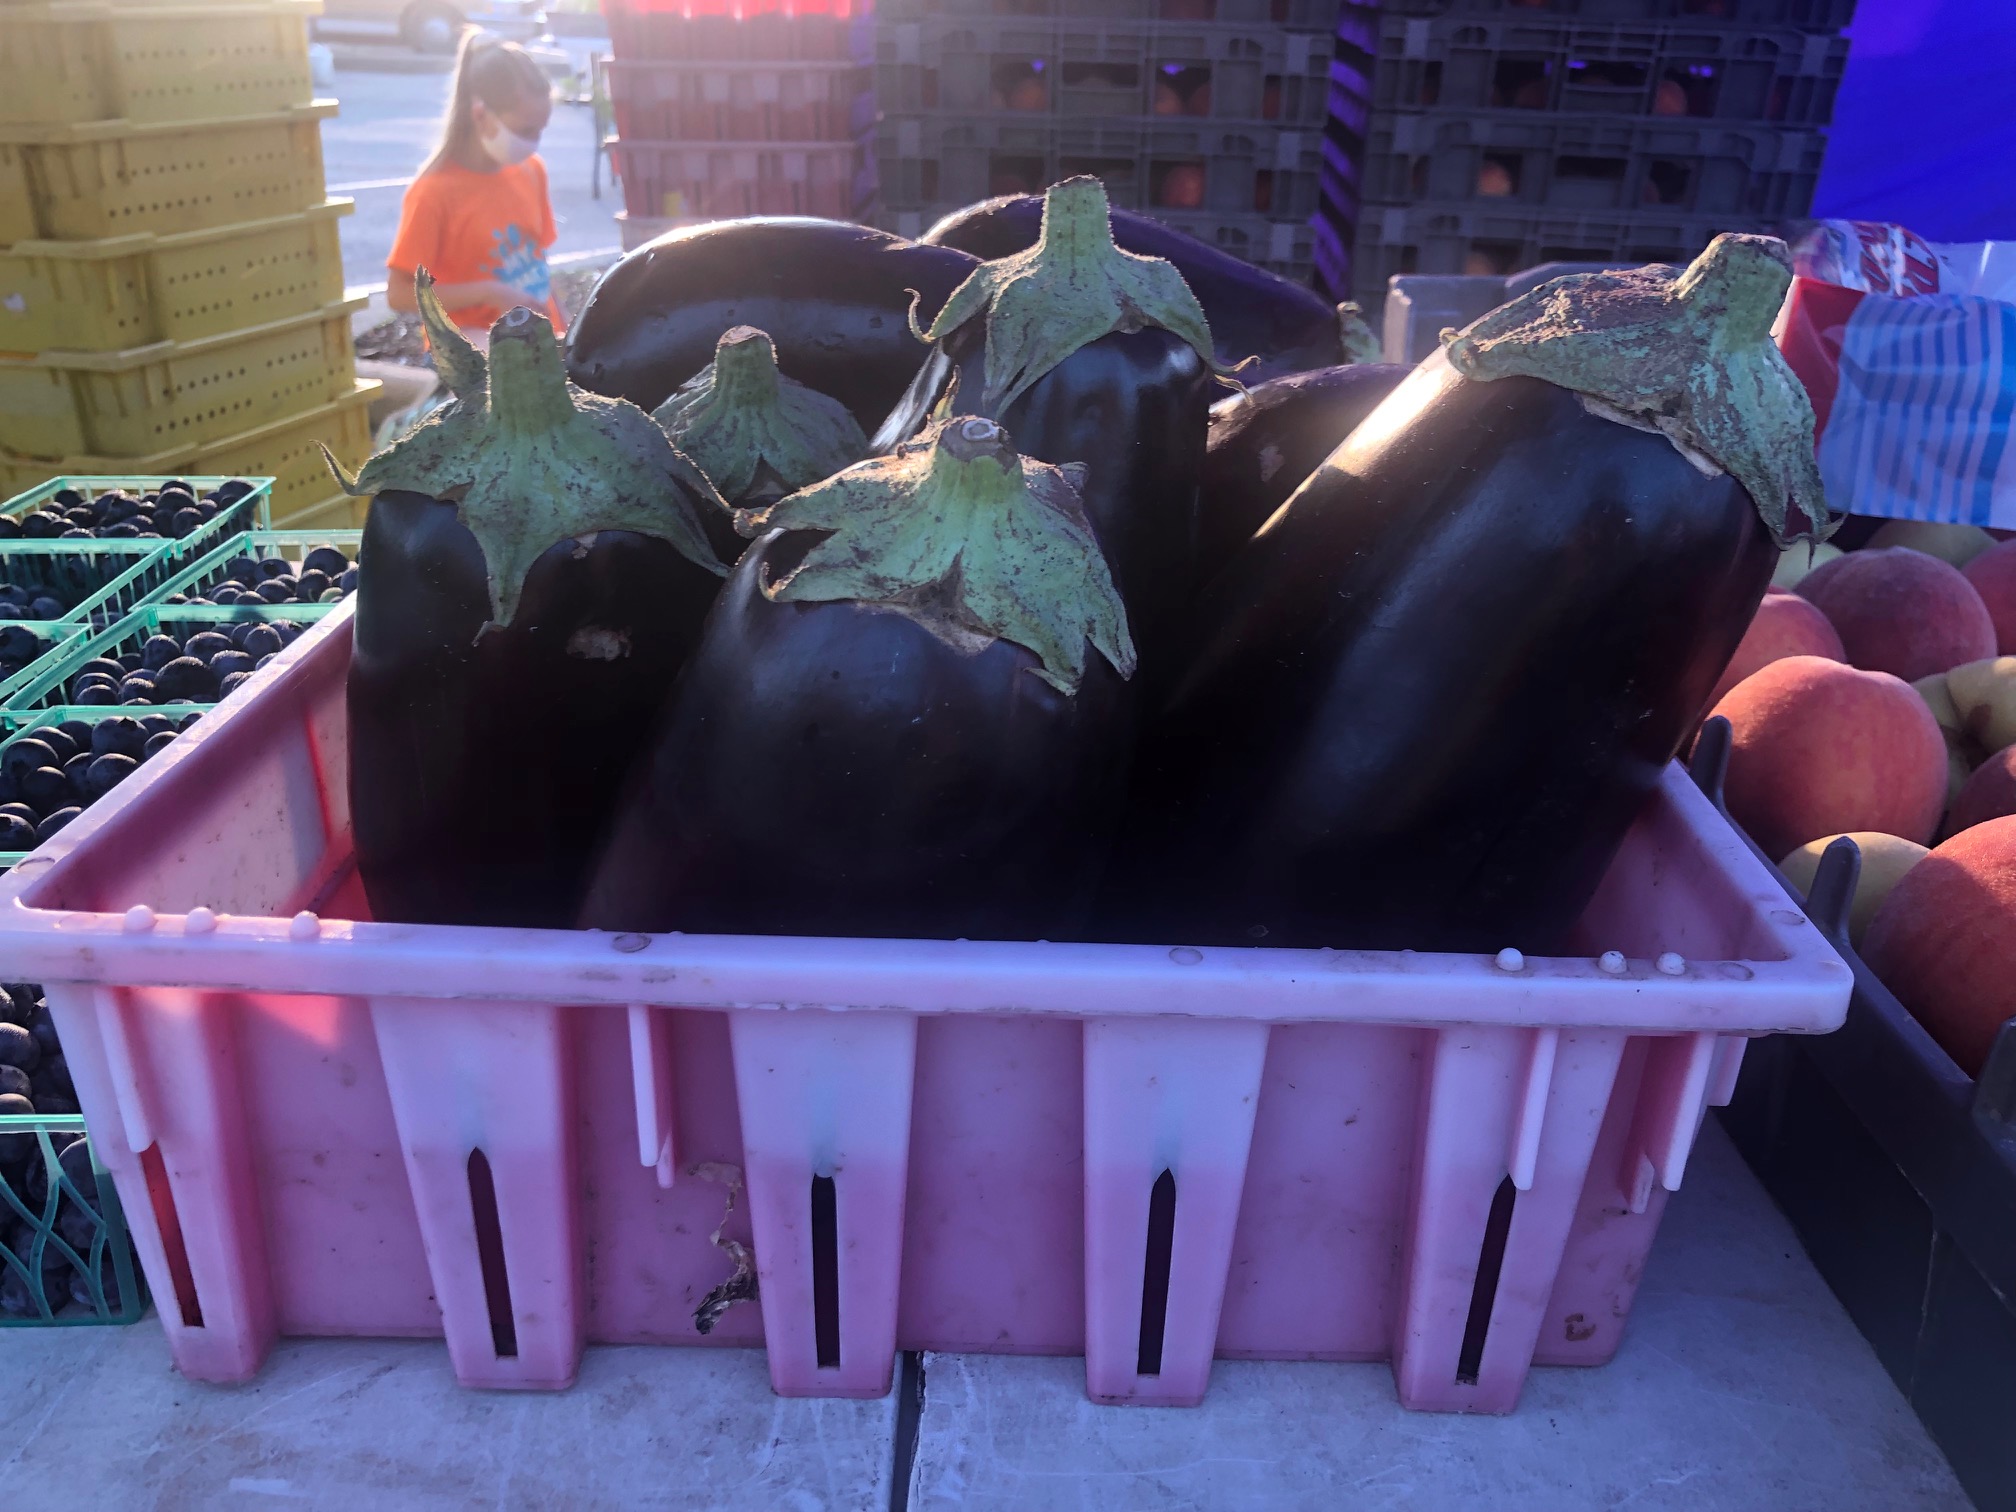 In a plastic, purple container, there are several large dark purple eggplants, stem up, waiting to be sold. Photo by Alyssa Buckley.